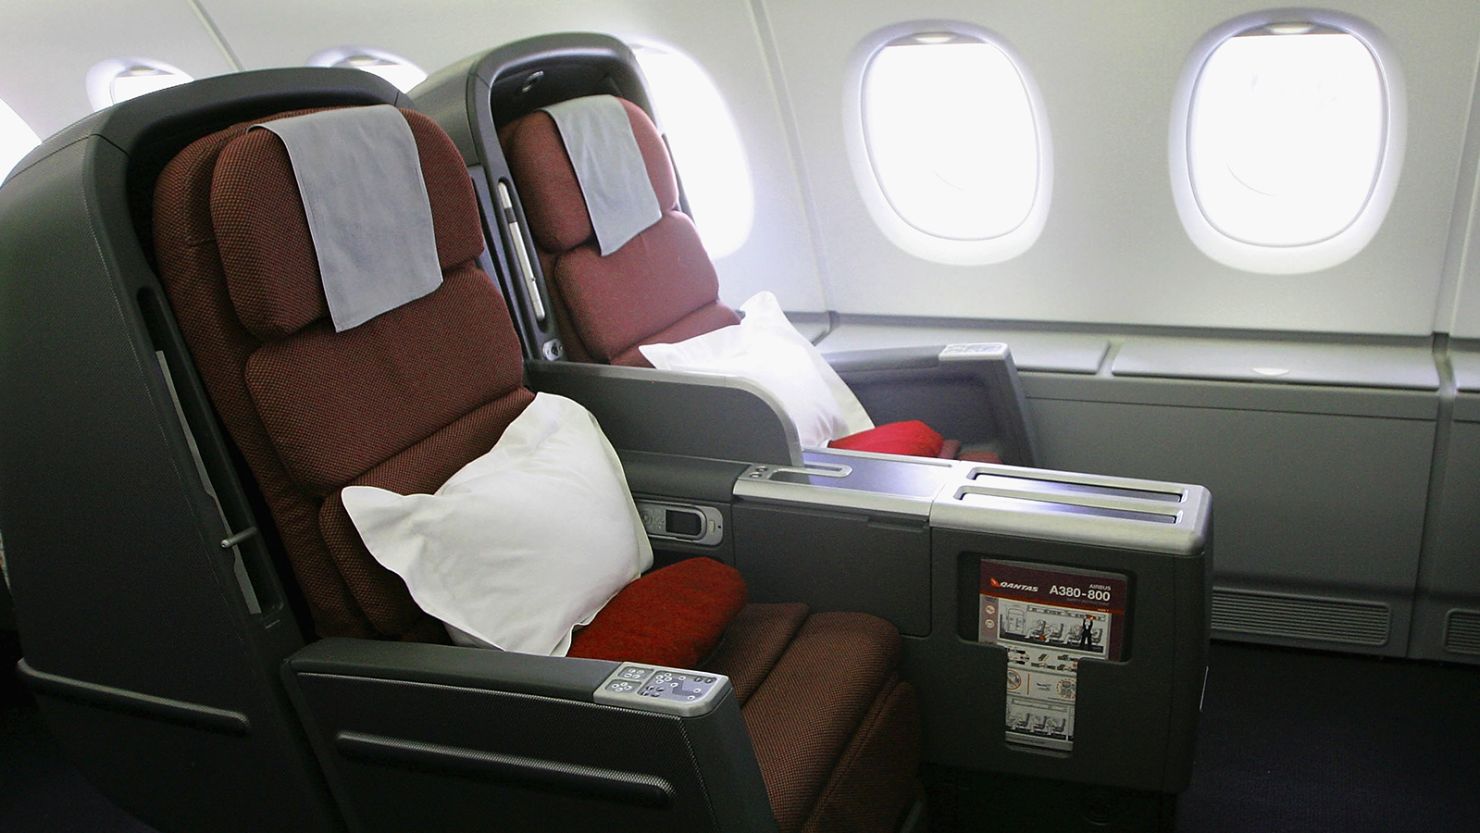 SYDNEY, AUSTRALIA - SEPTEMBER 21:  A general view of the new business class seats onboard the new Qantas A380 flagship the 'Nancy-Bird Walton' as she joins the Qantas fleet at Sydney Domestic Airport on September 21, 2008 in Sydney, Australia. The Qantas A380 will feature seating for 450 passengers across four cabins and will commence commercial services from Melbourne to Los Angeles on October 20, and from Sydney to Los Angeles on October 24.  (Photo by Sergio Dionisio/Getty Images)